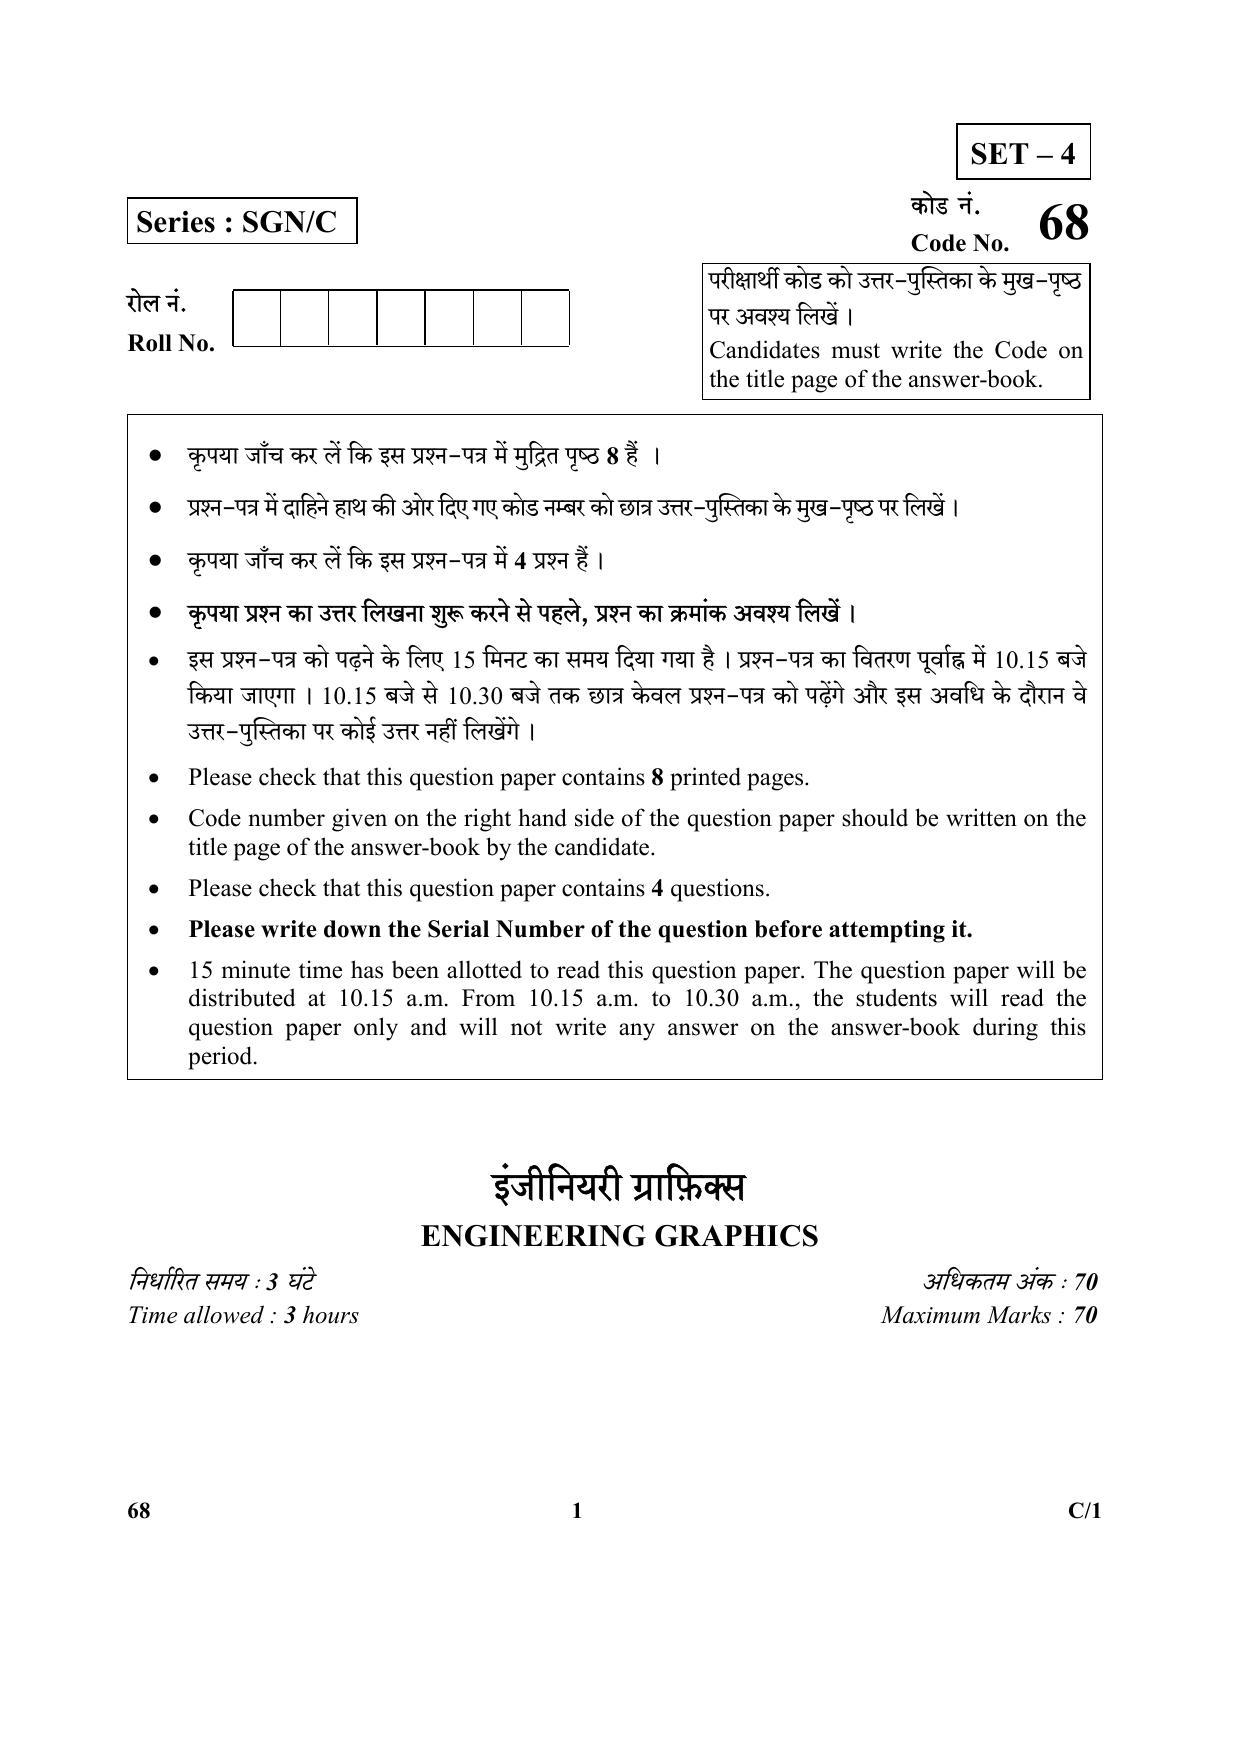 CBSE Class 12 68 (Engineering Graphics) 2018 Compartment Question Paper - Page 1